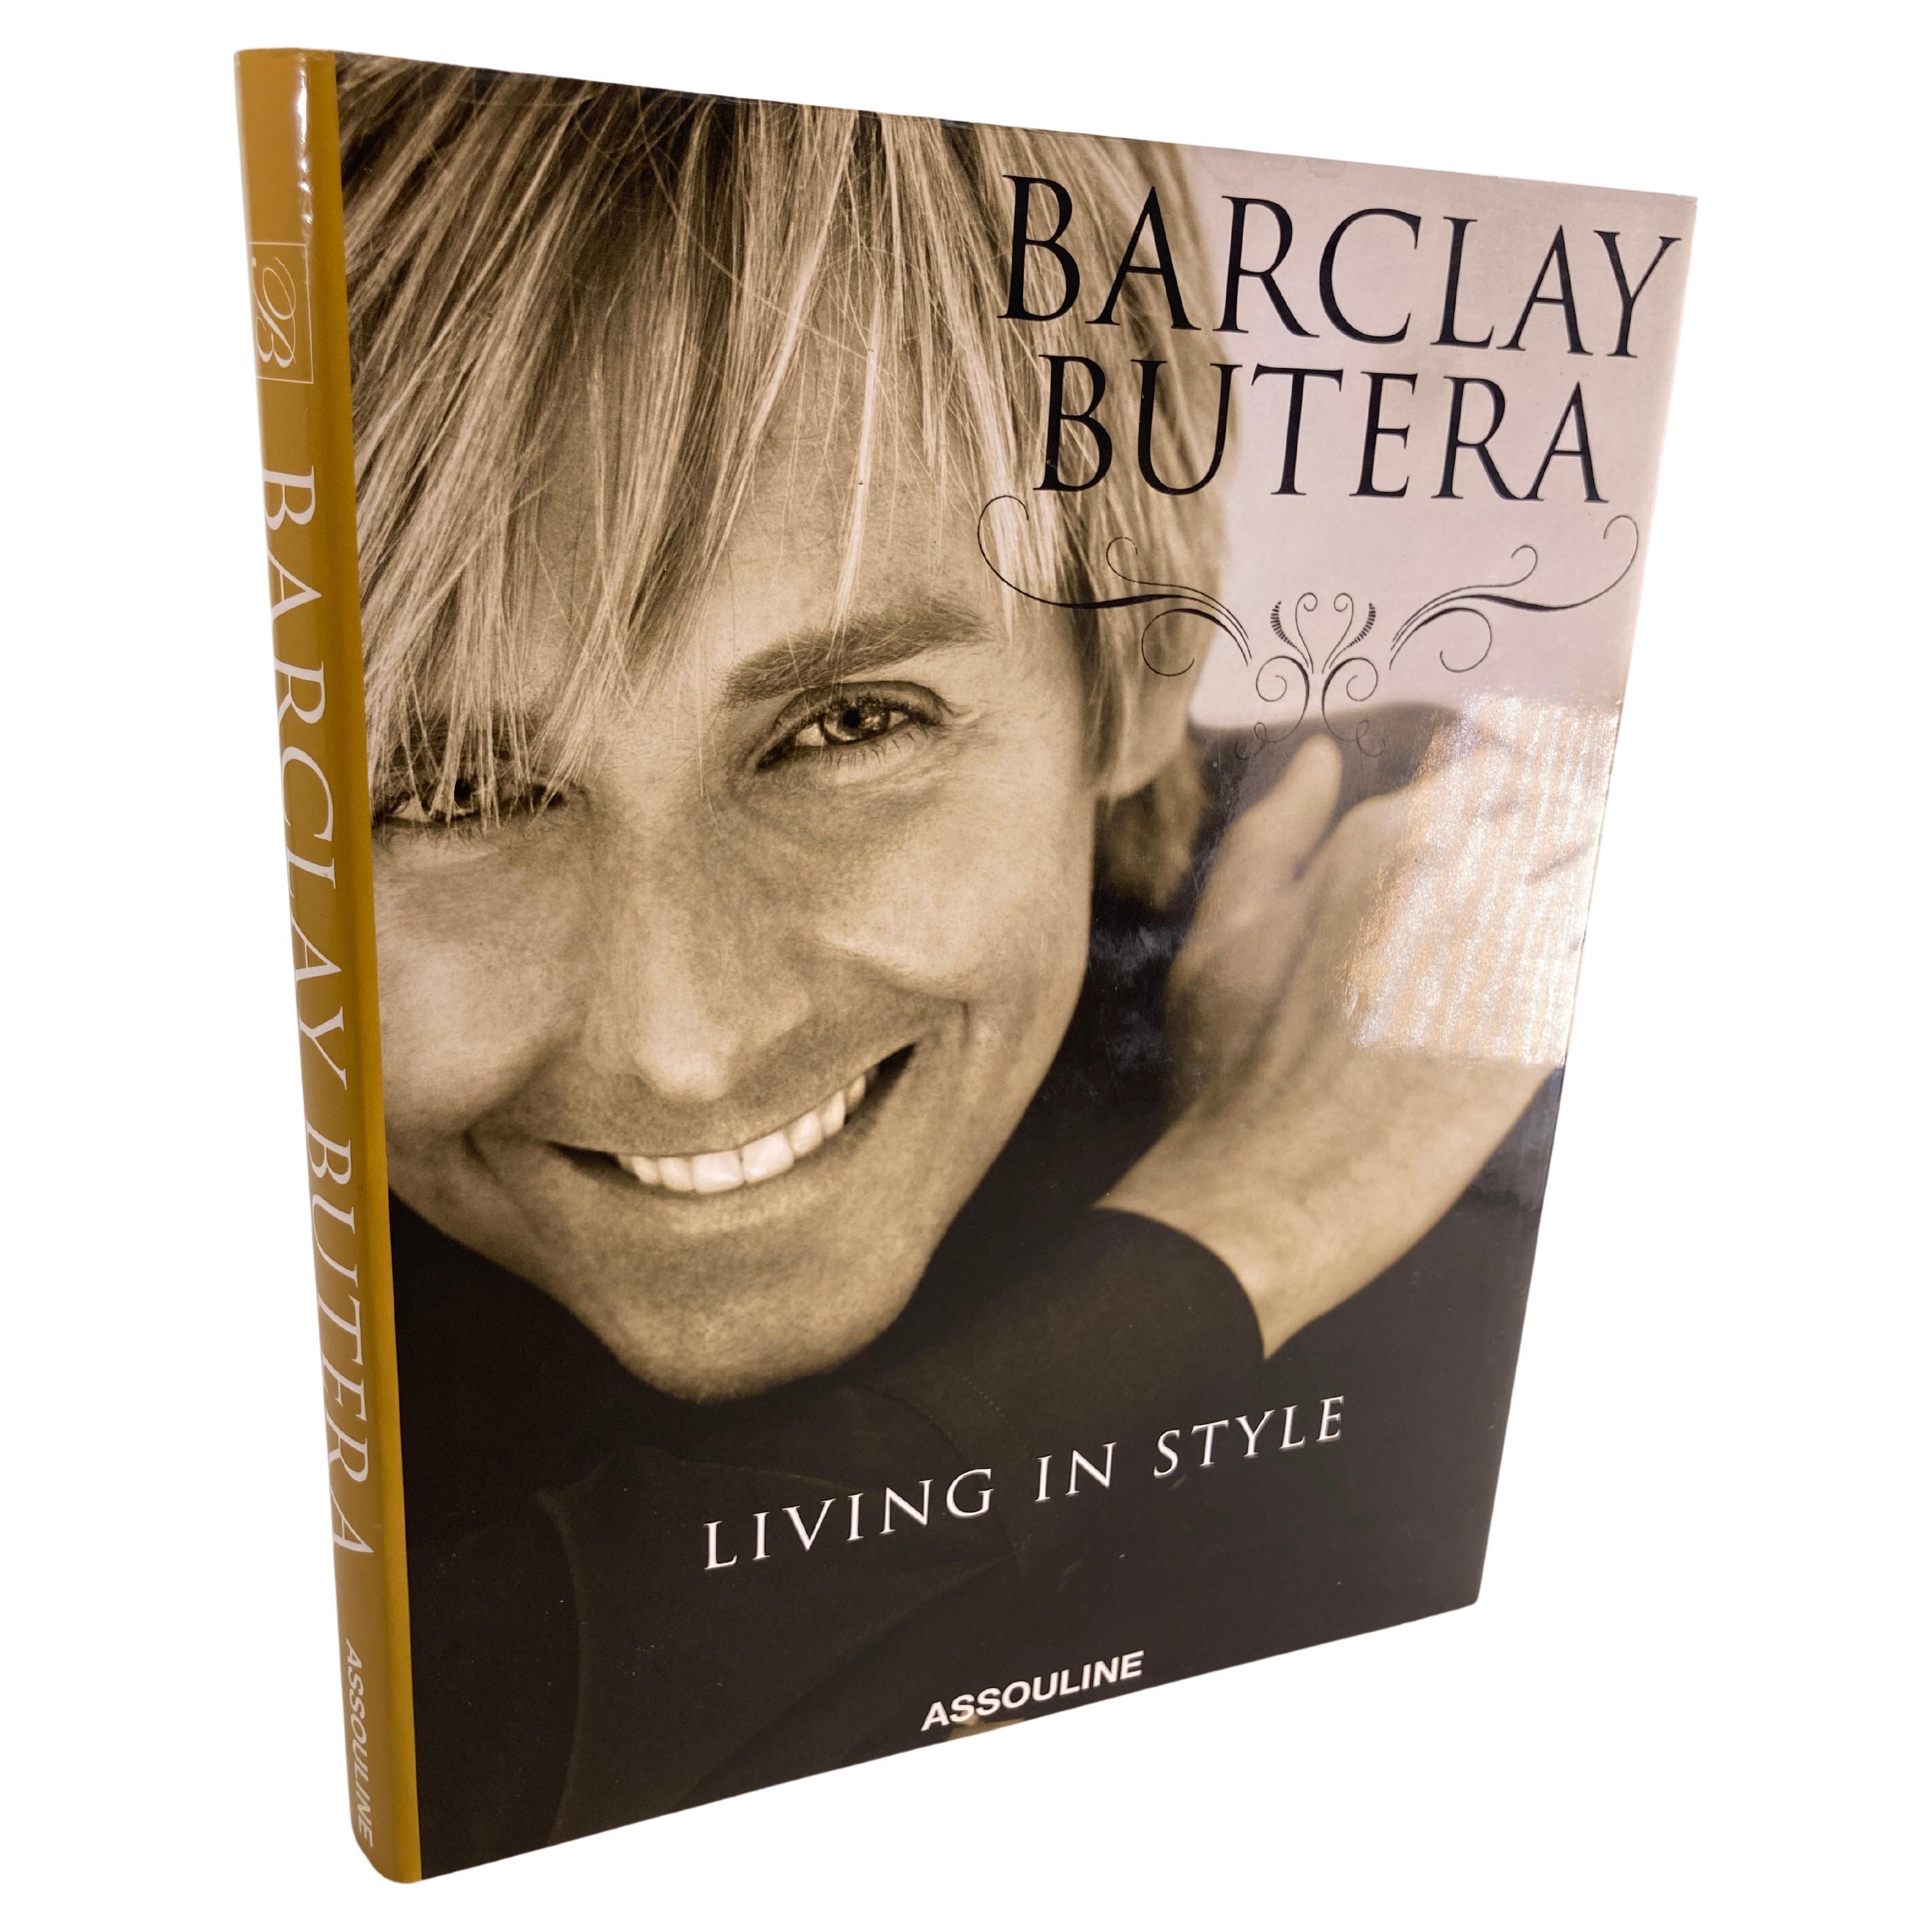 Barclay Butera "Living in Style" Coffee Table Book